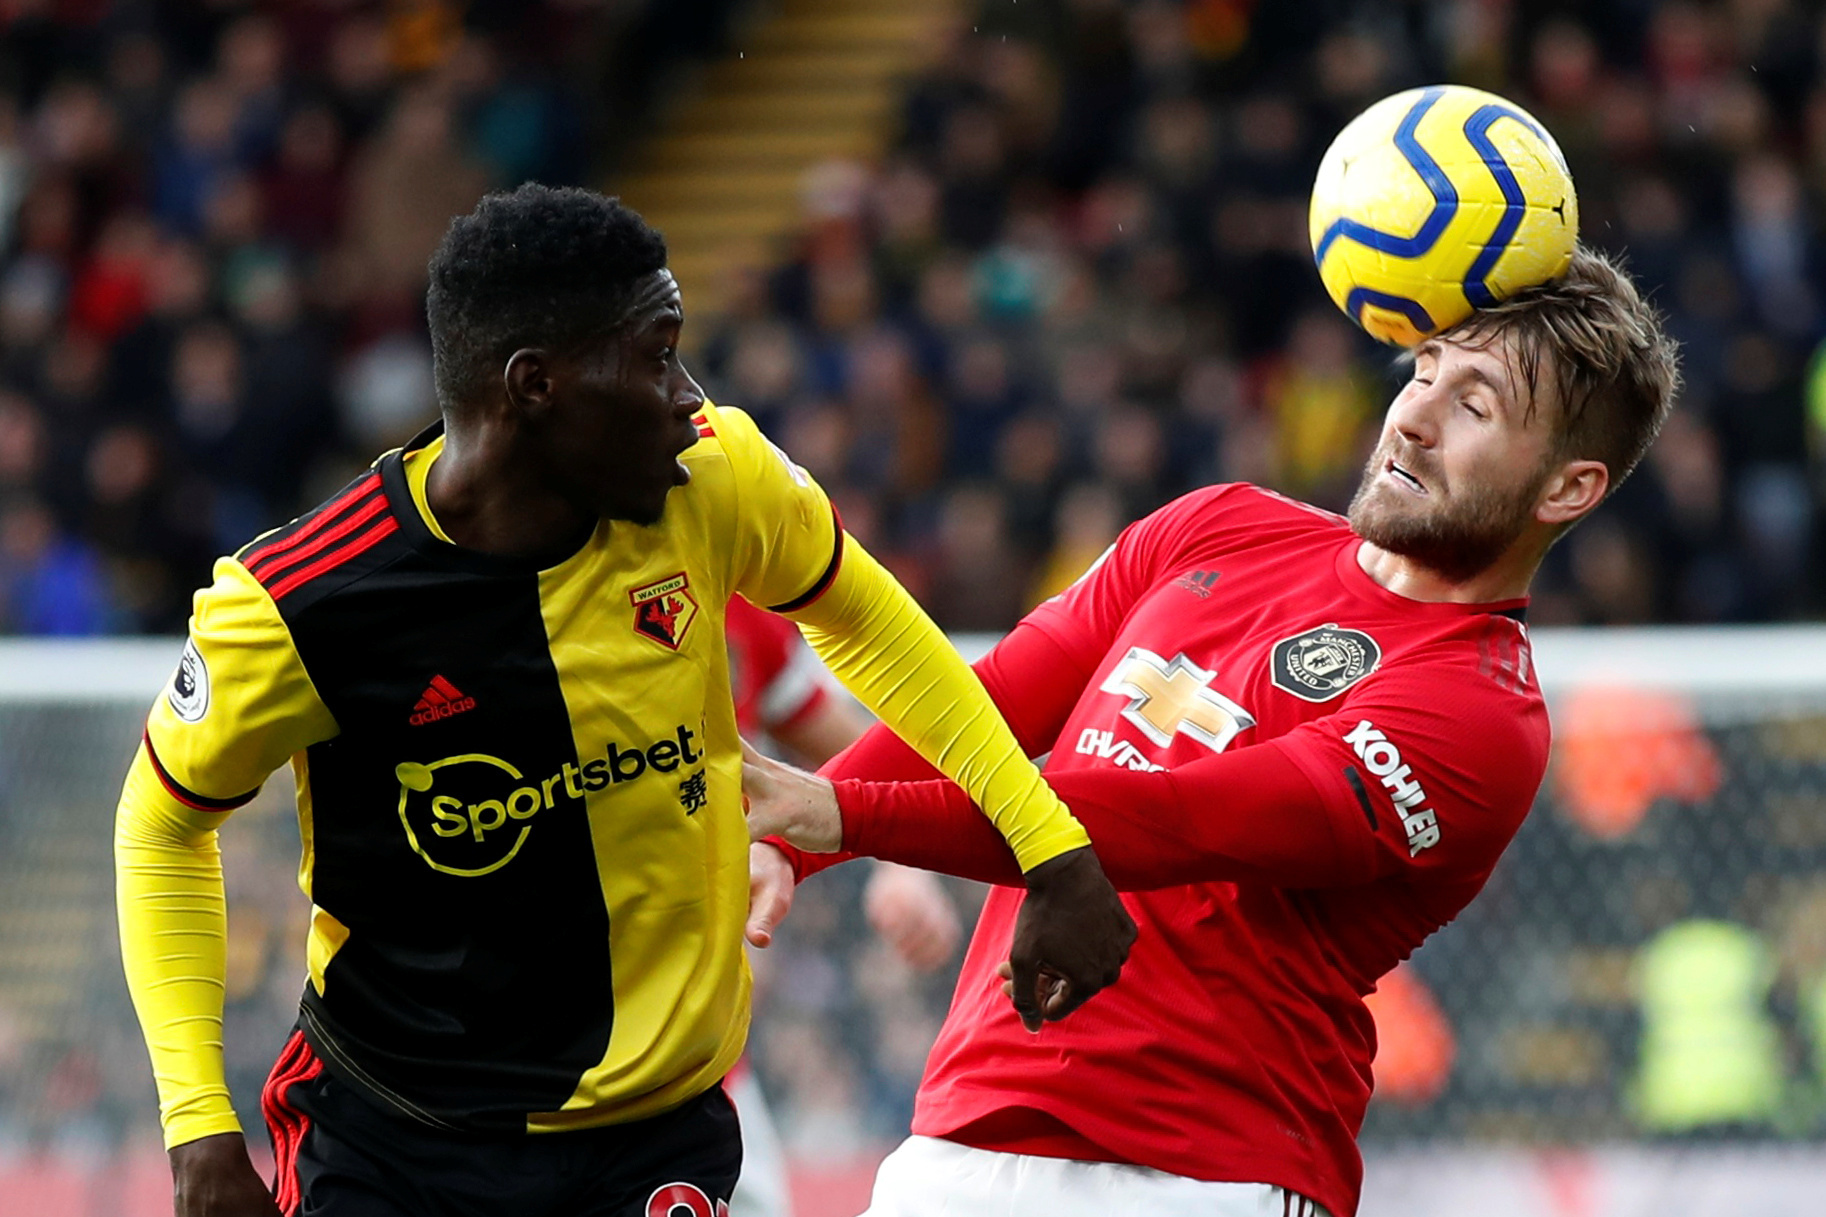 Manchester United unlikely to try and sign Ismaila Sarr from Watford